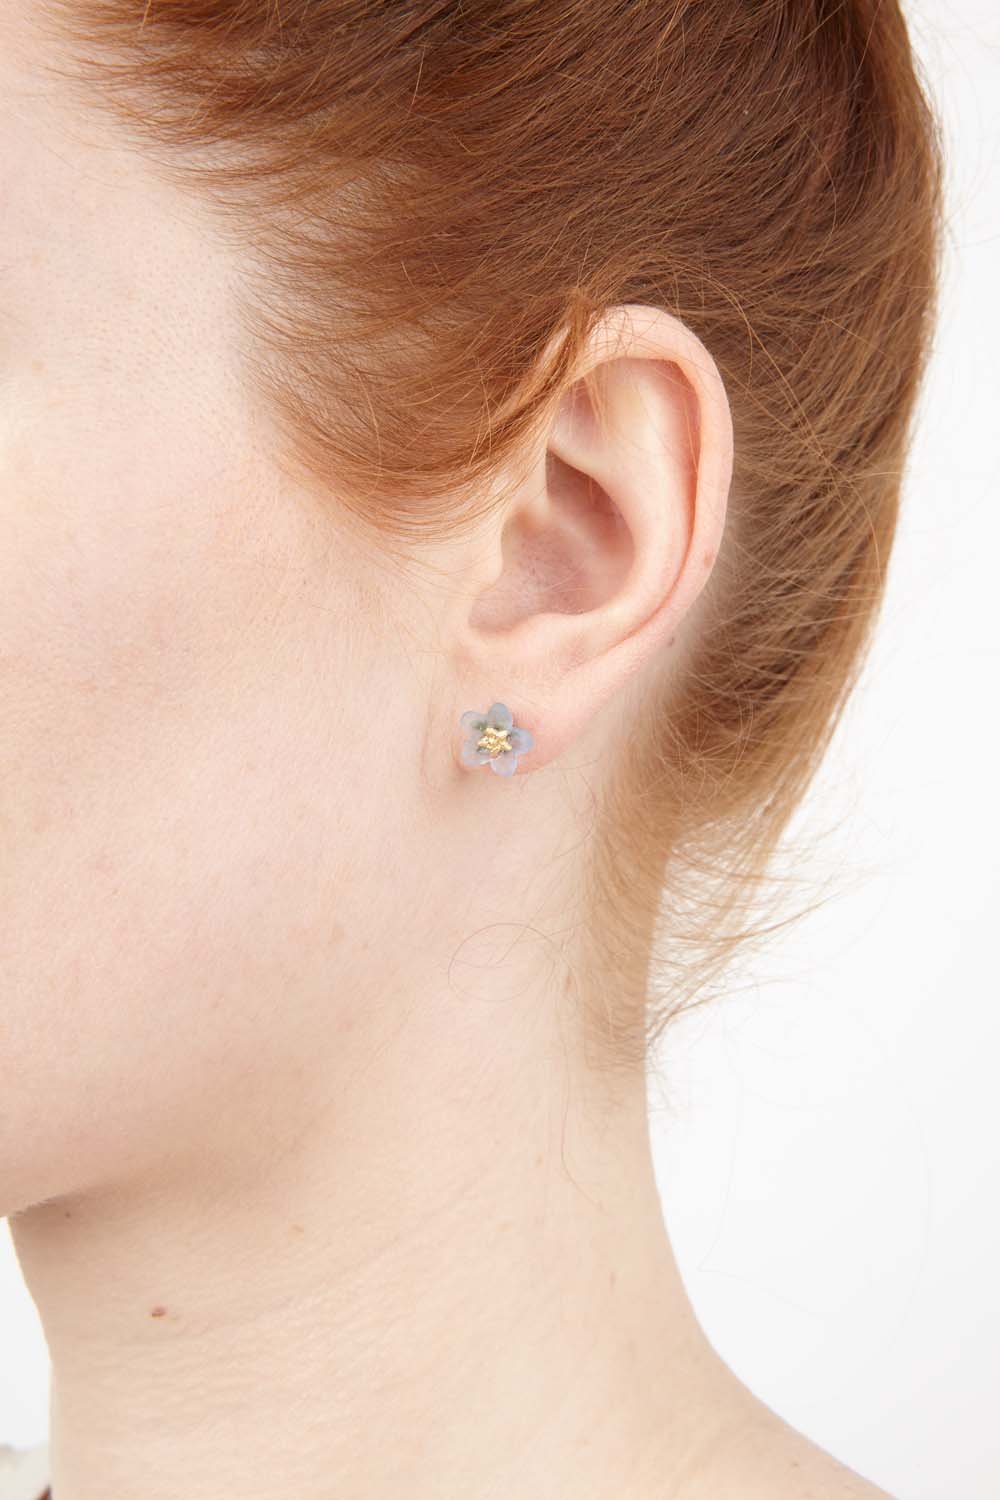 Forget Me Not Earrings - Petite Post